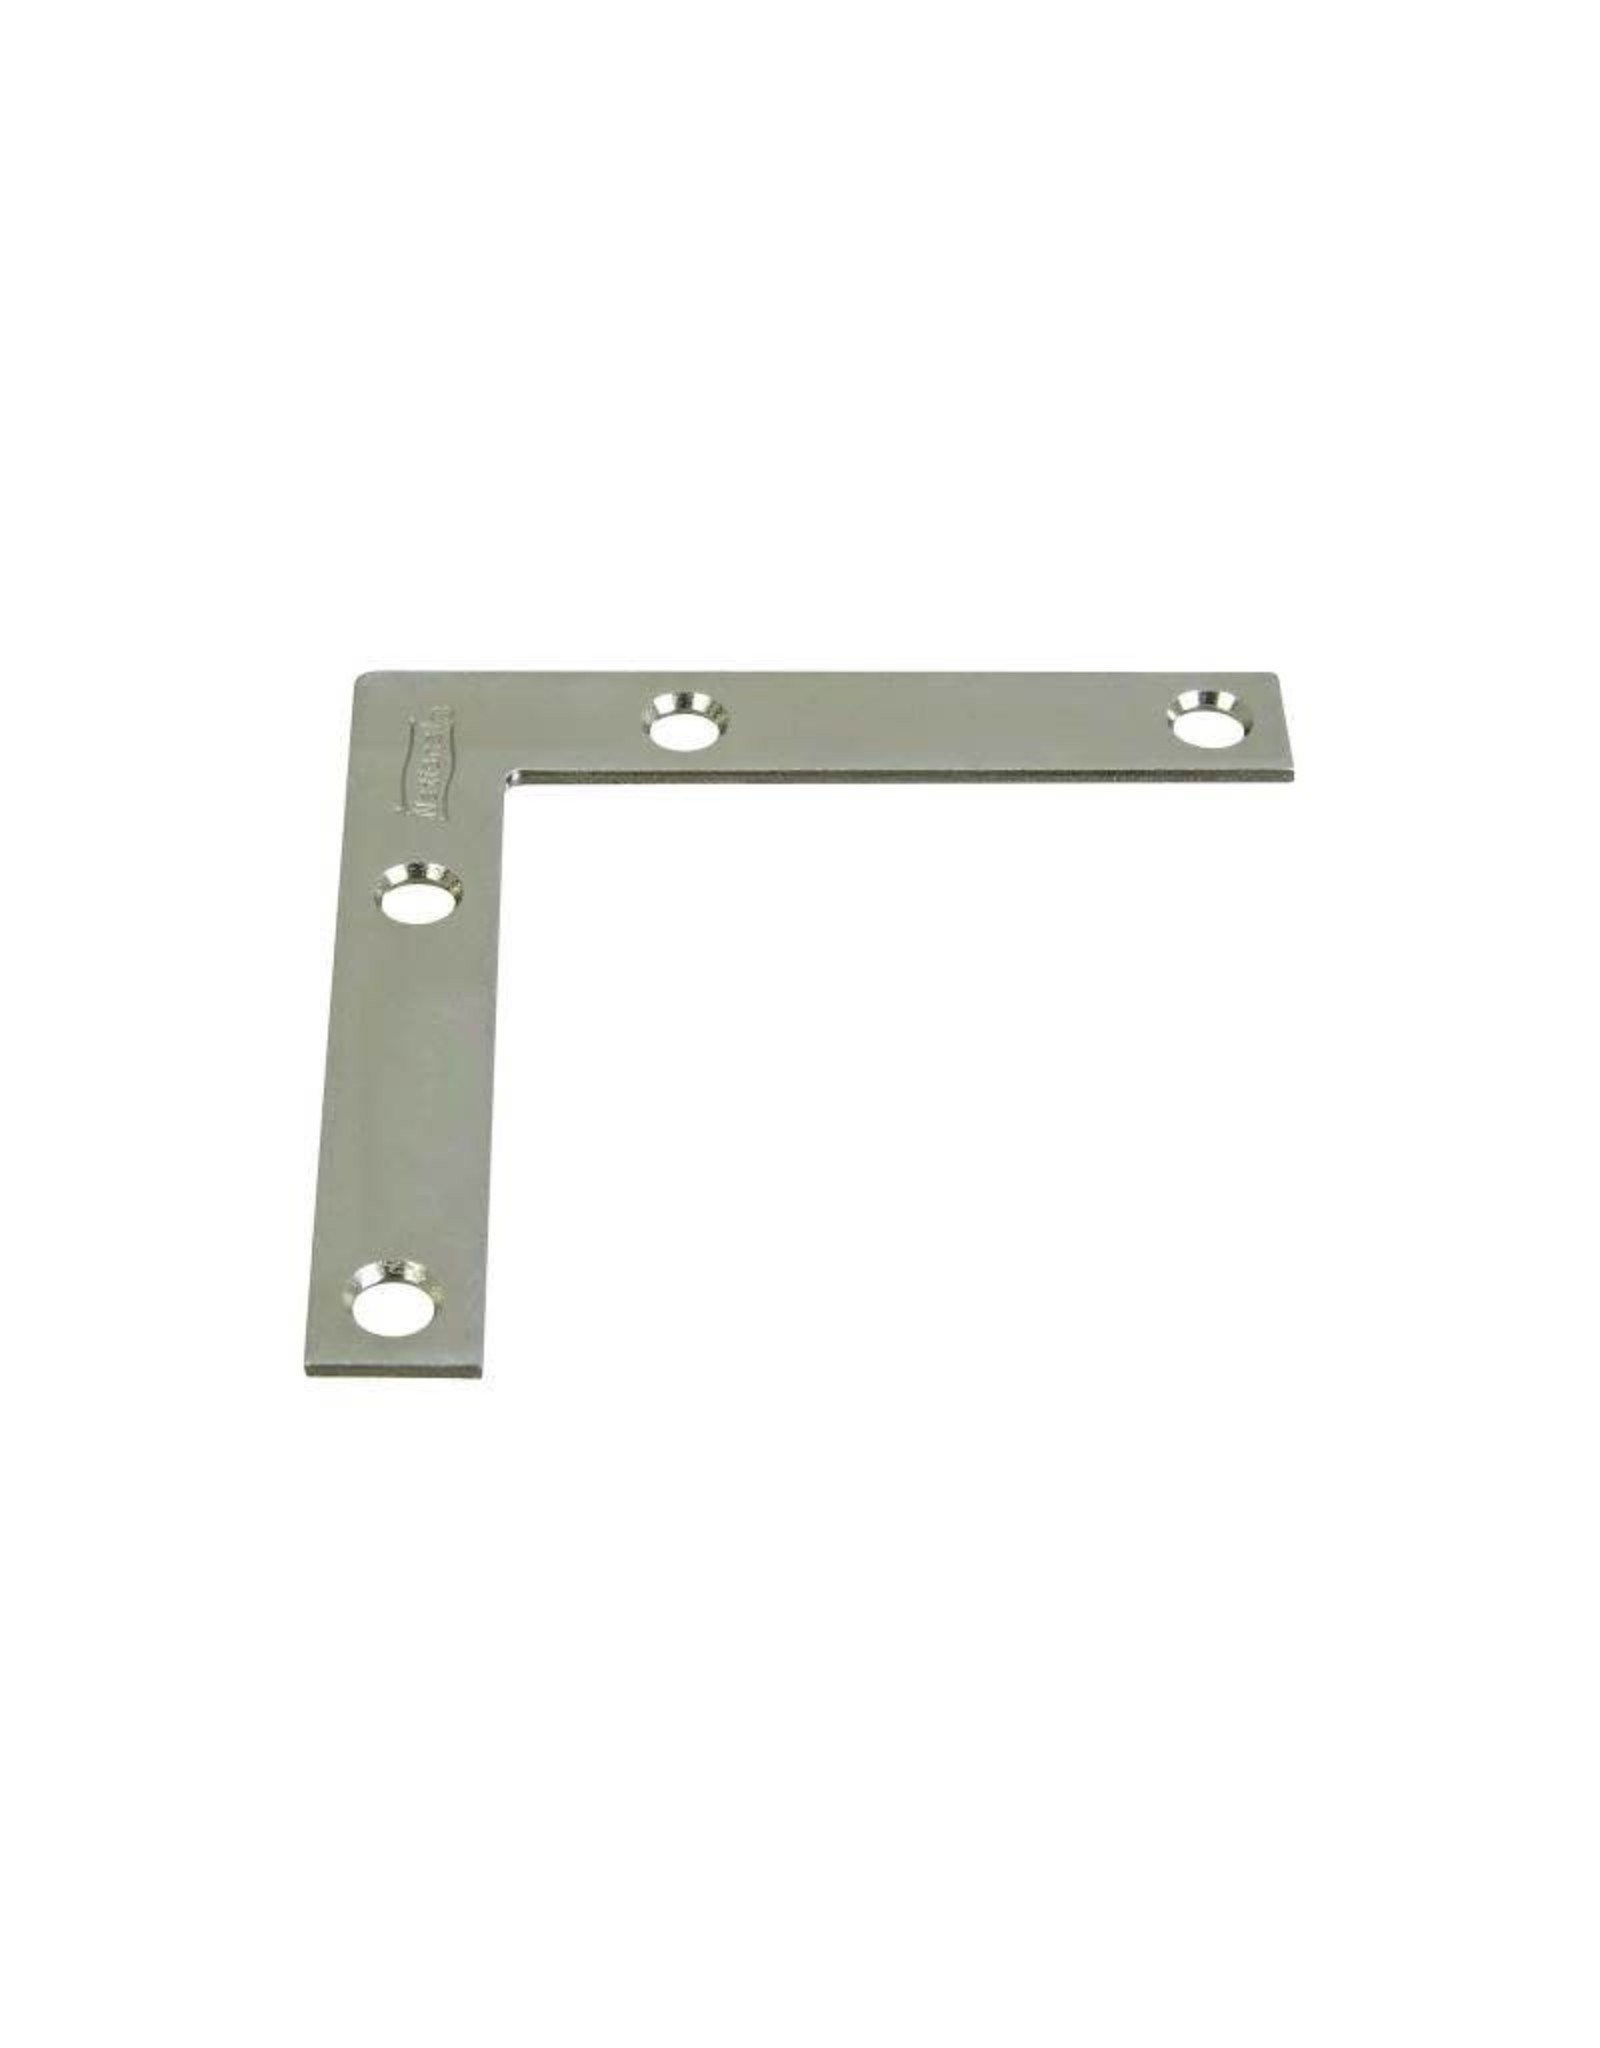 National Hardware National Hardware V117 Series N113-969 Corner Brace, 3 in L, 1/2 in W, 3 in H, Steel, Zinc, 0.07 Thick Material